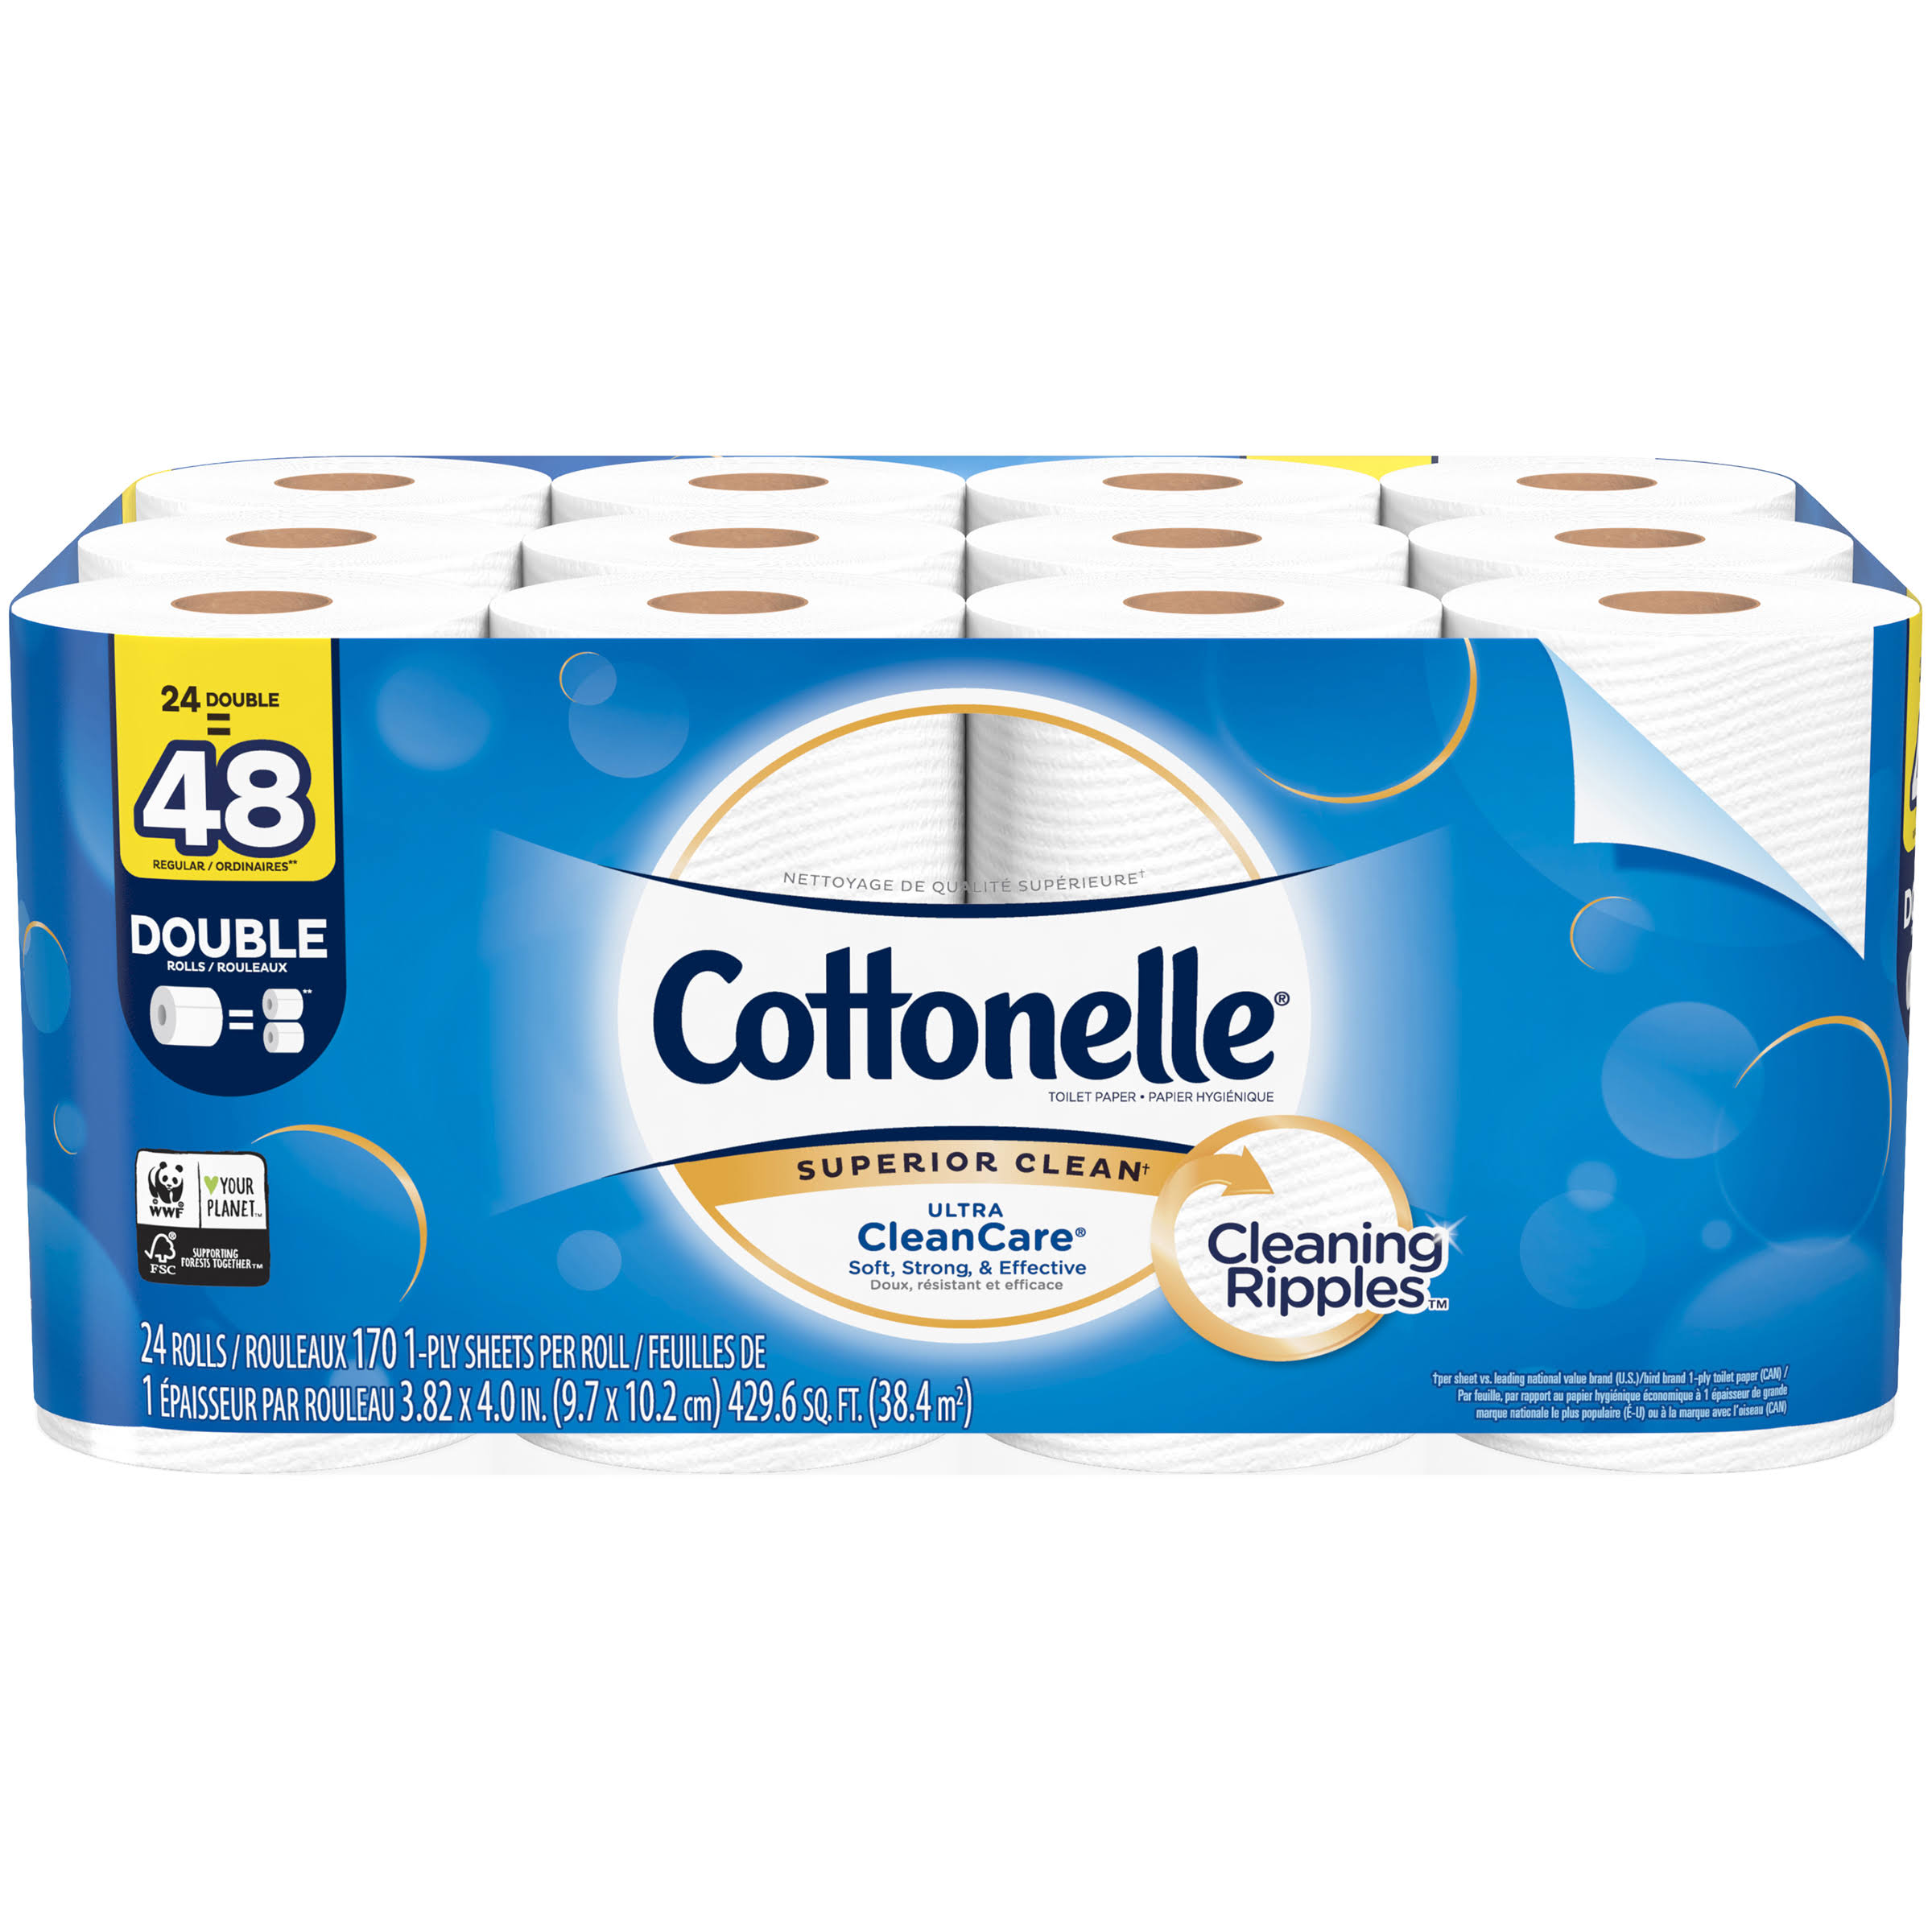 Cottonelle Ultra CleanCare Toilet Paper, Double Rolls, 1-Ply - 24 rolls